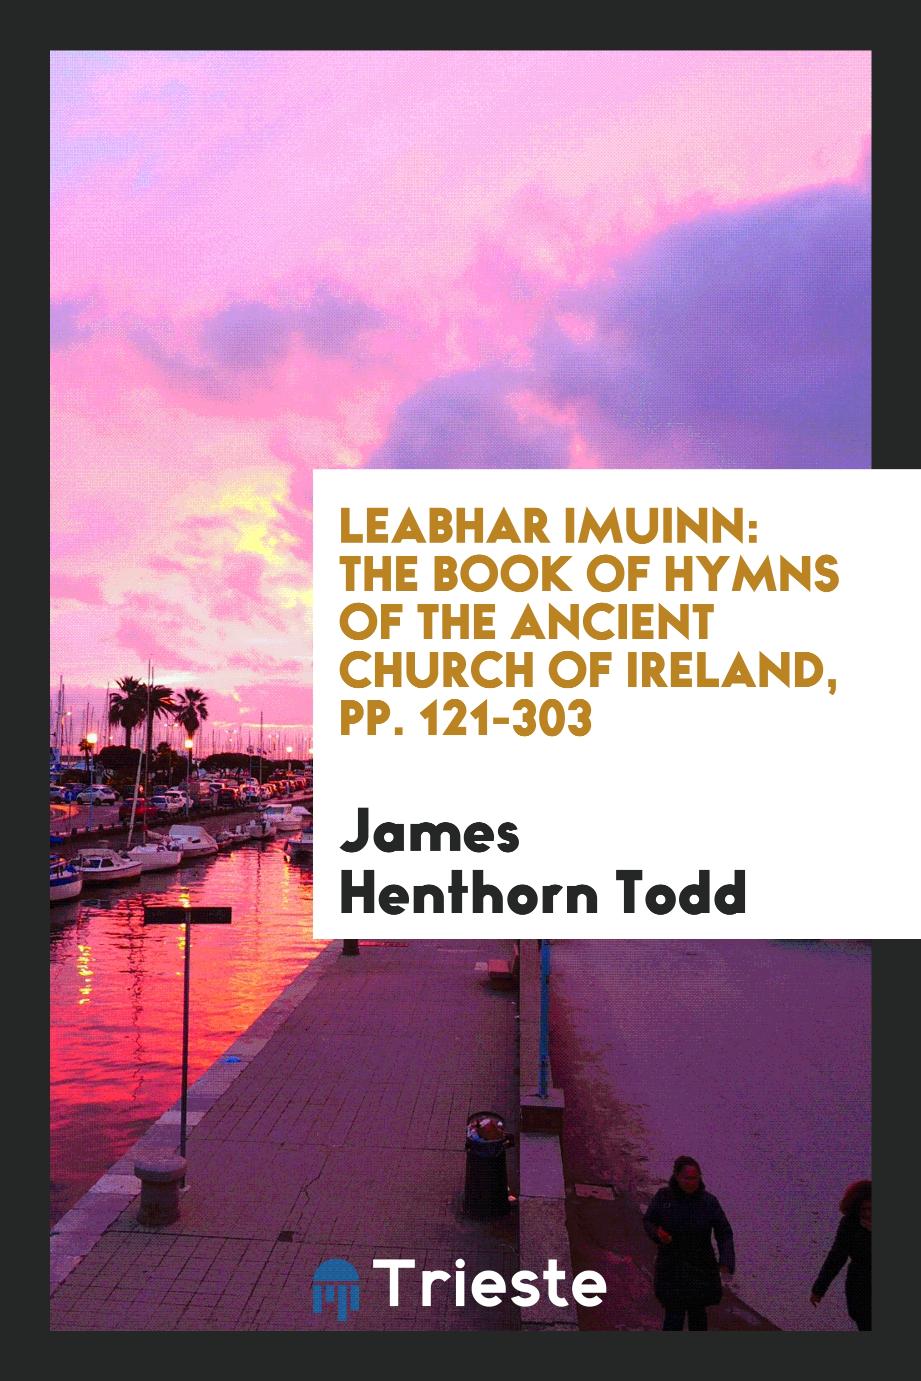 Leabhar Imuinn: The Book of Hymns of the Ancient Church of Ireland, pp. 121-303